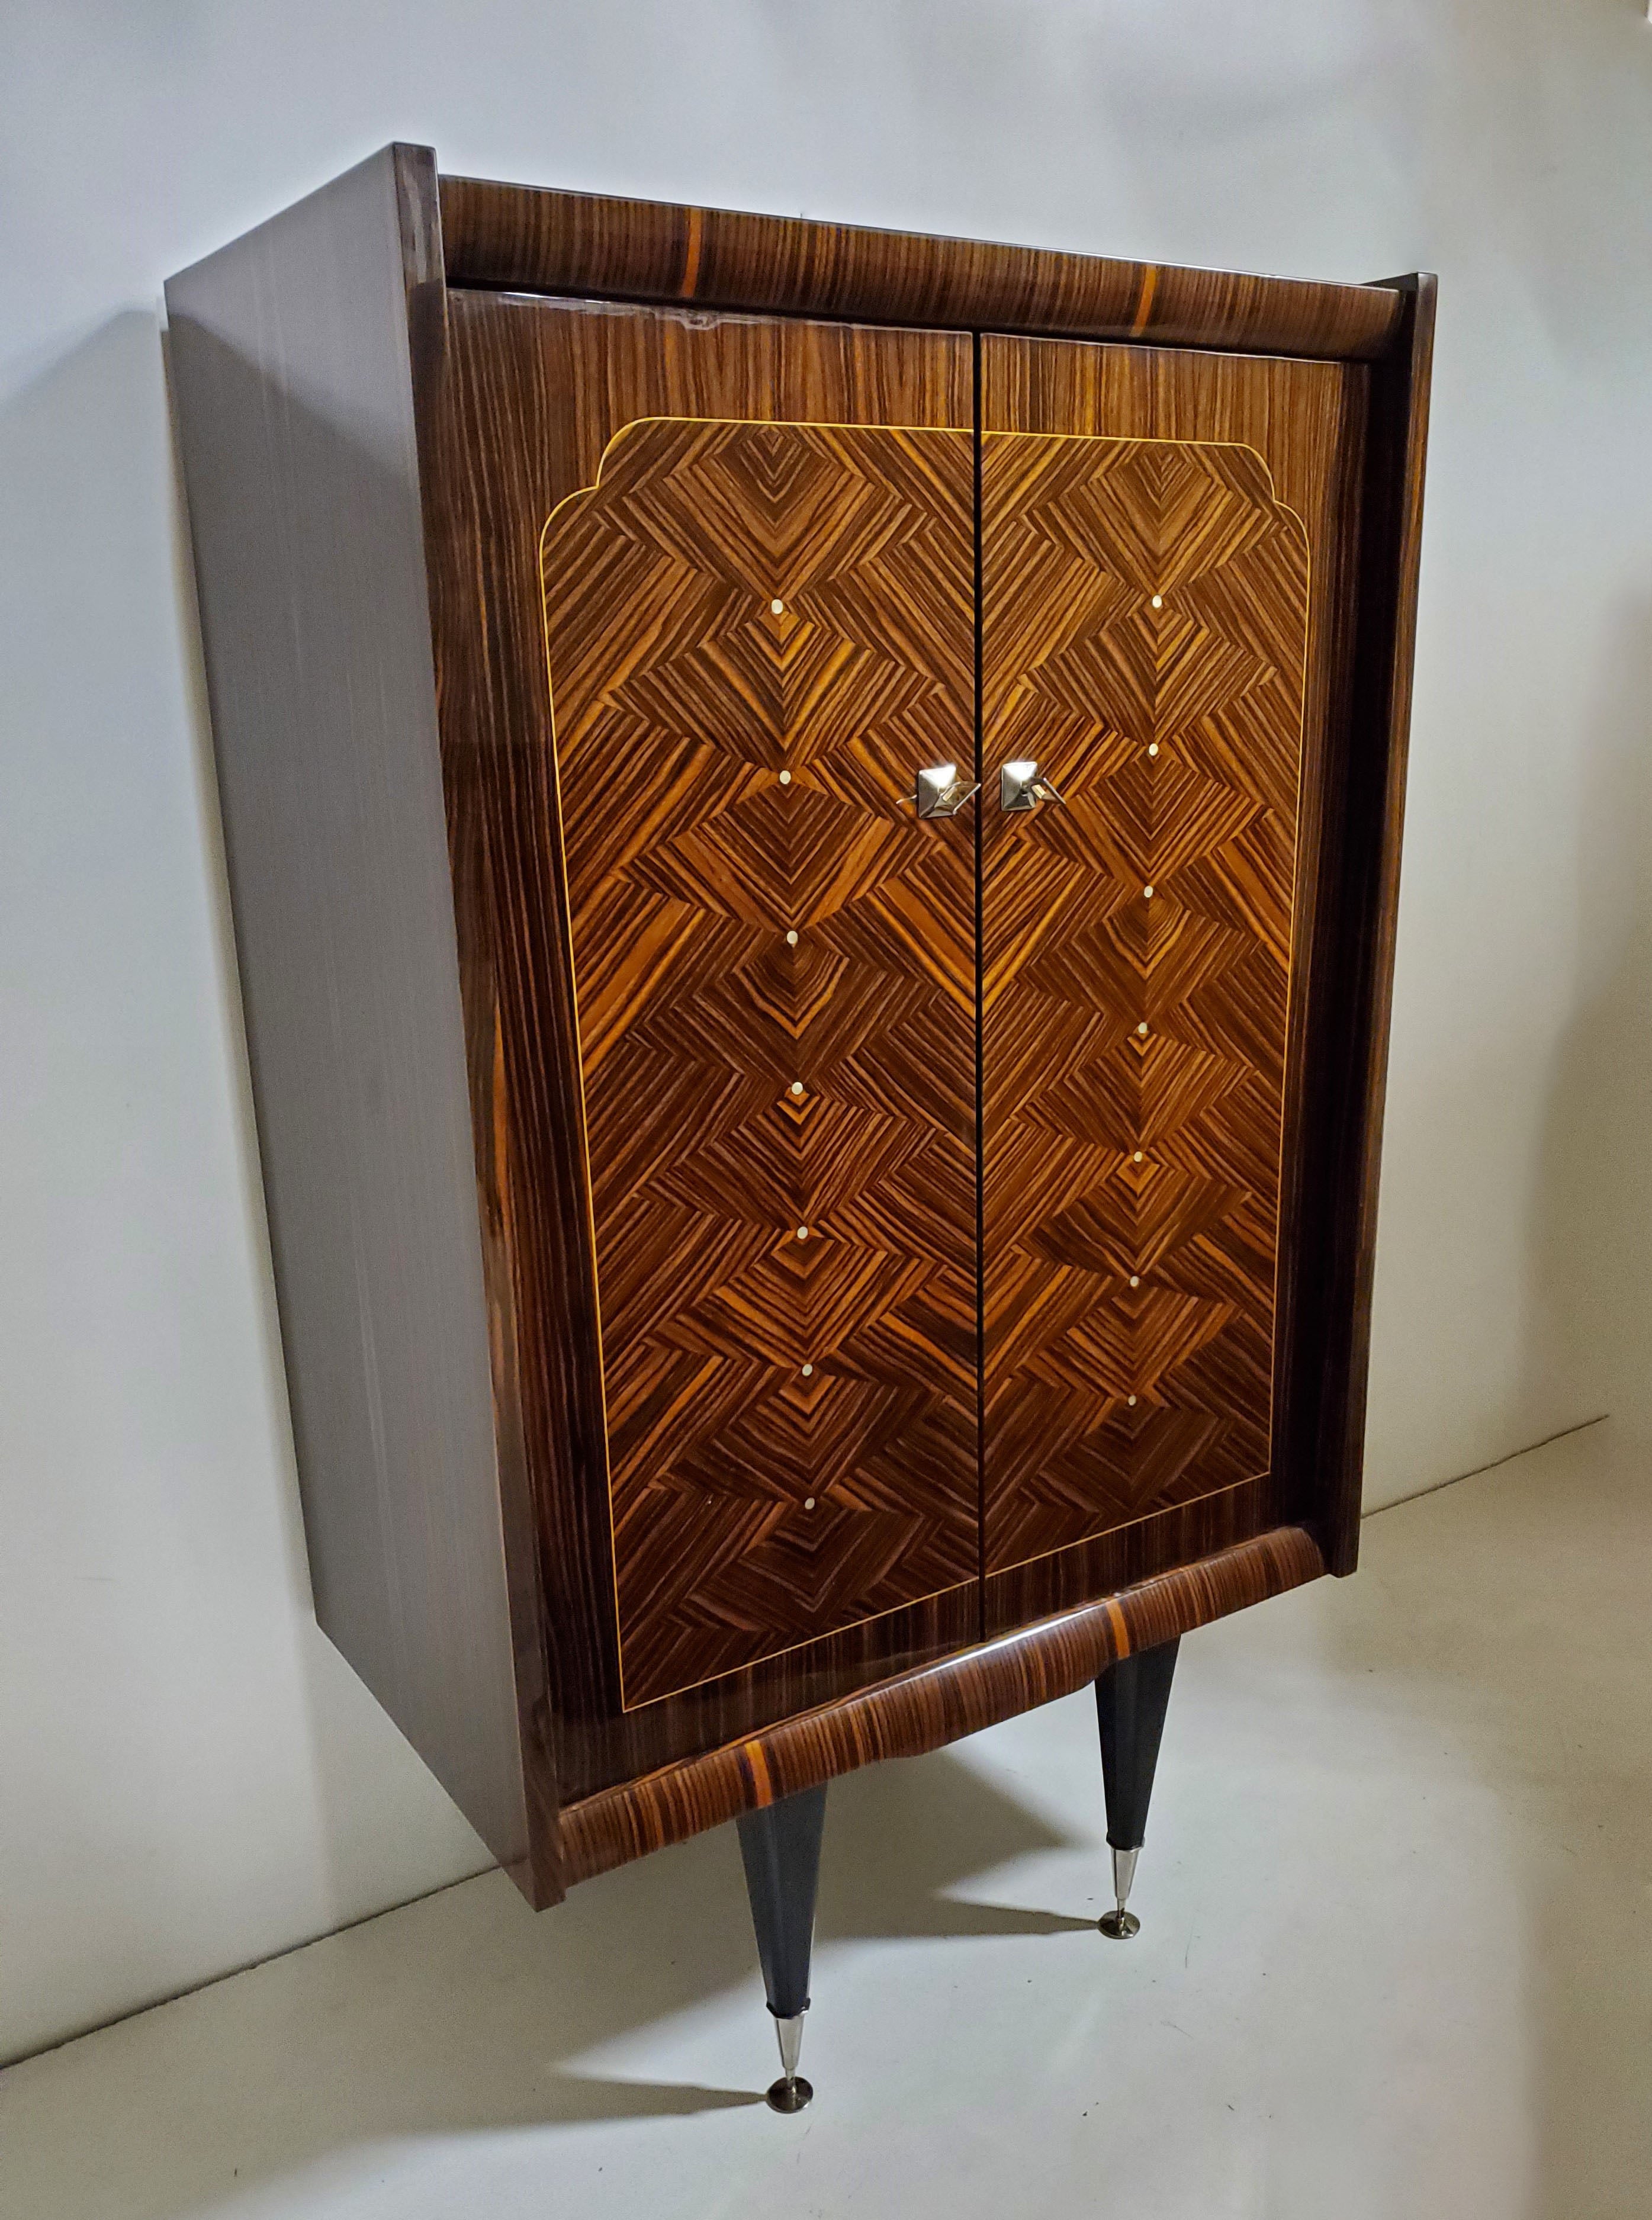 An outstanding French Art Deco / Mid Century Modern tall cabinet.
with N.F. Ameublement seal. The armoire features stunning Macassar ebony in a geometric parquetry inlaid pattern with dots of decorative mother of pearl inlay. The case rests on